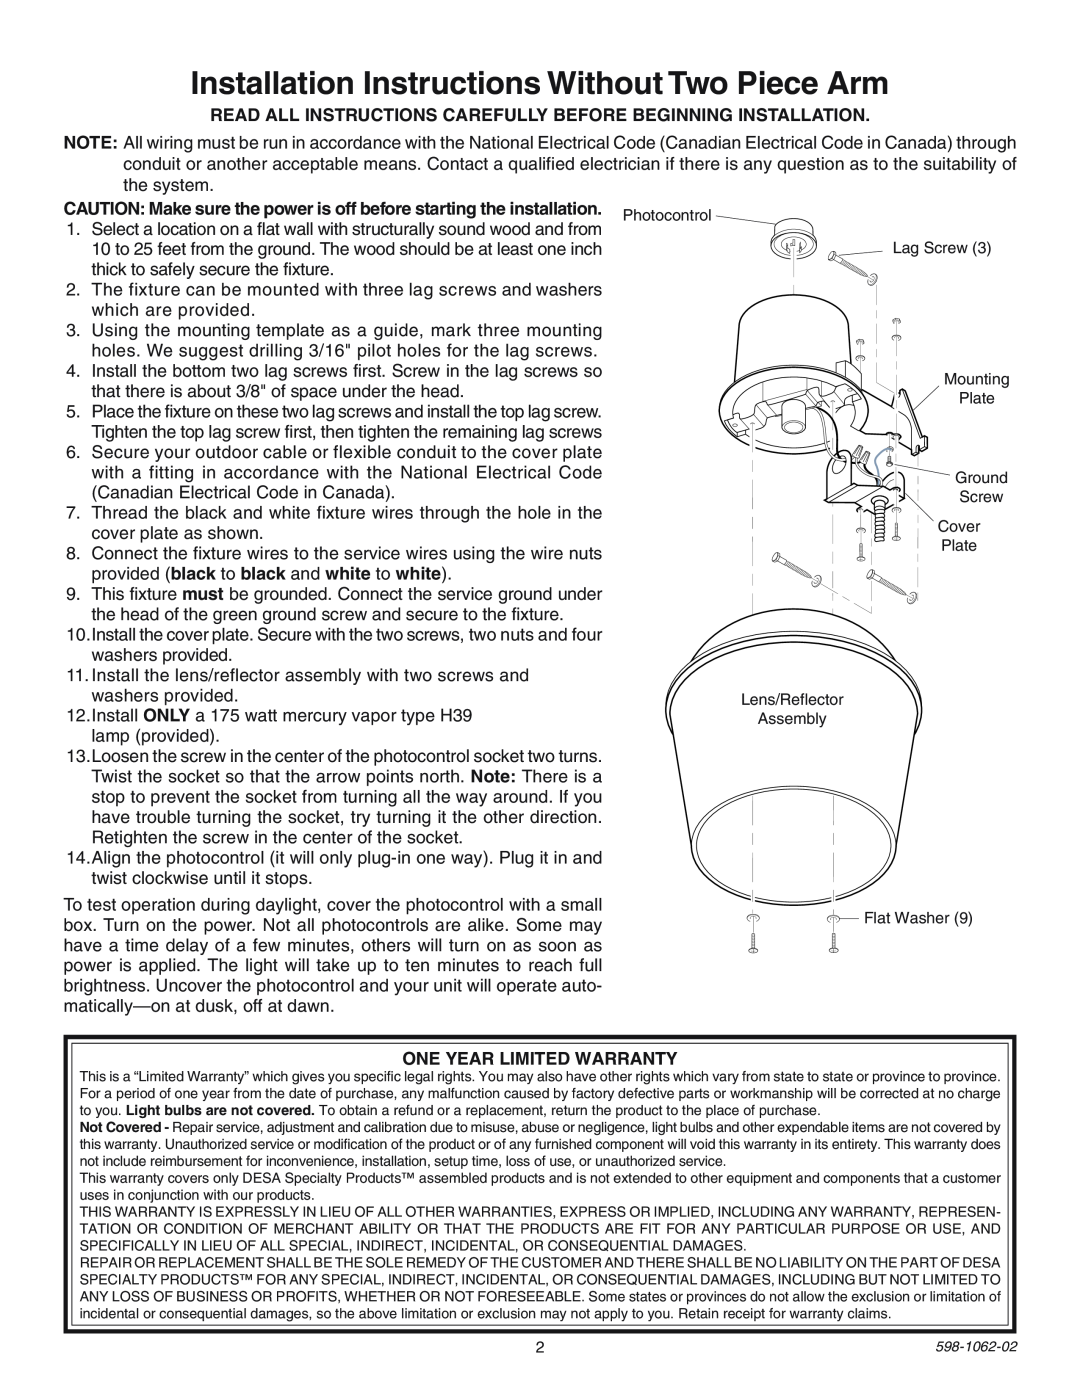 Heath Zenith SL-5653 installation instructions Installation Instructions Without Two Piece Arm, One Year Limited Warranty 